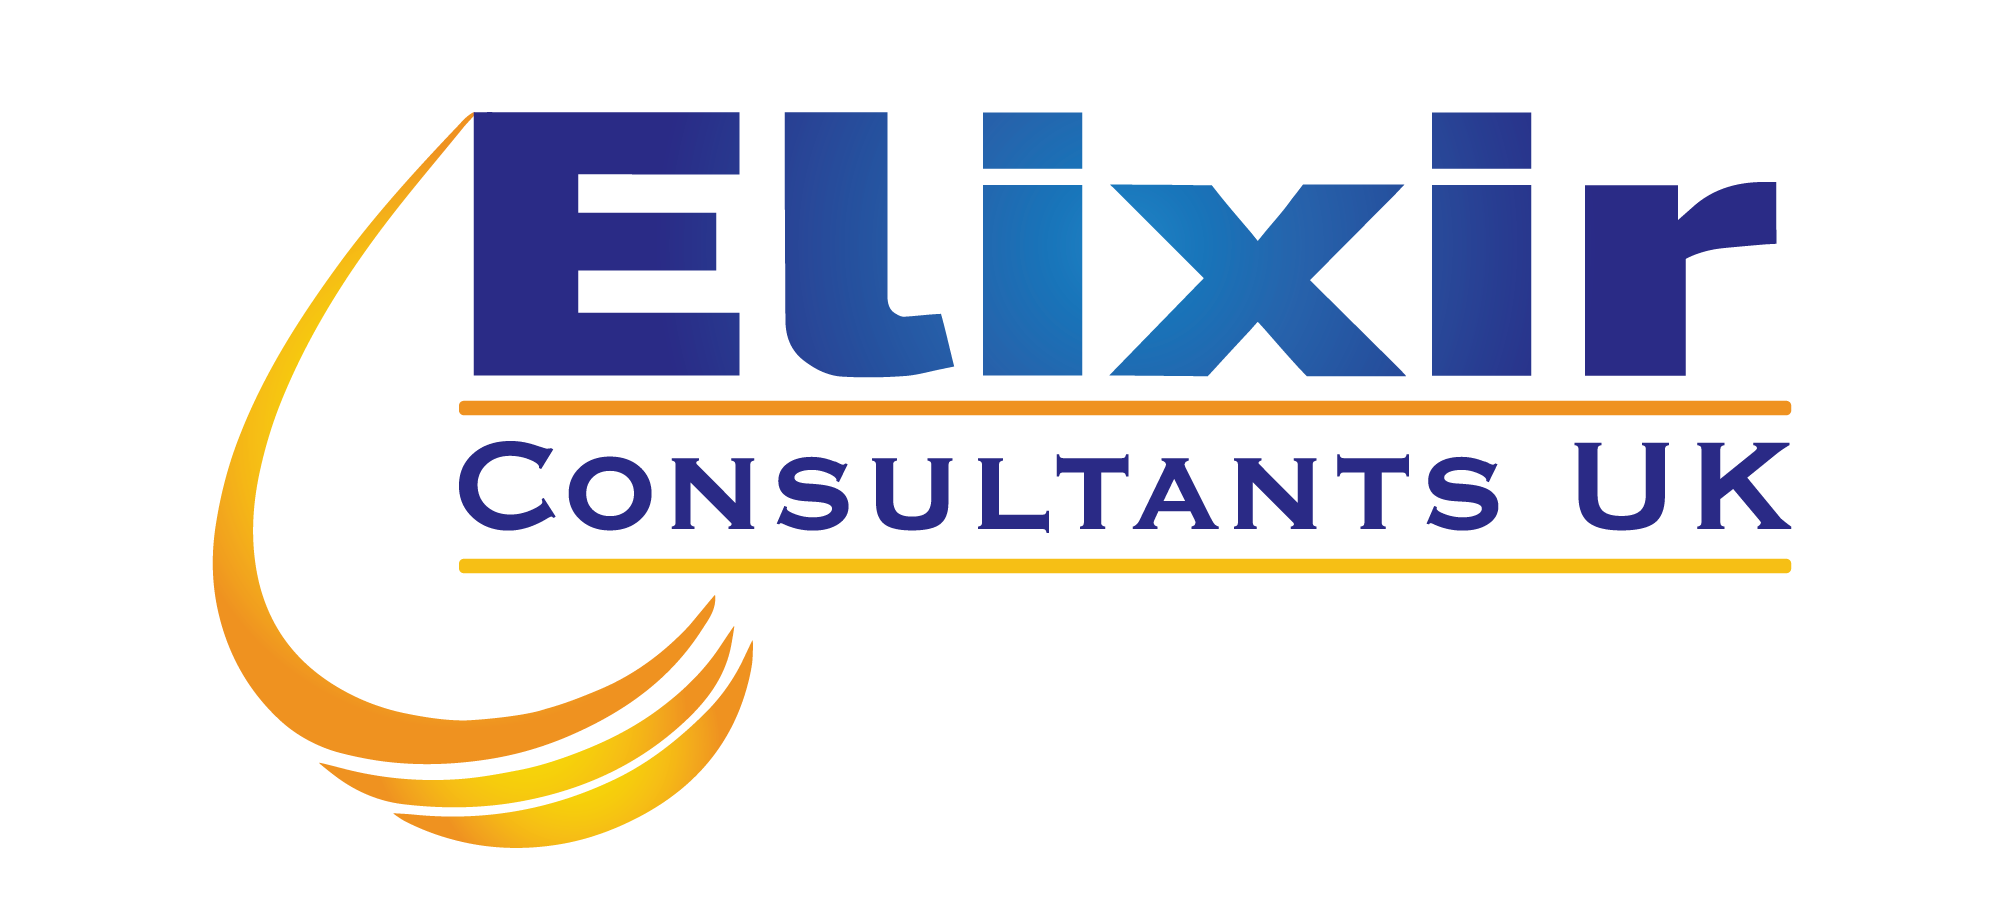 Oil and gas consultancy